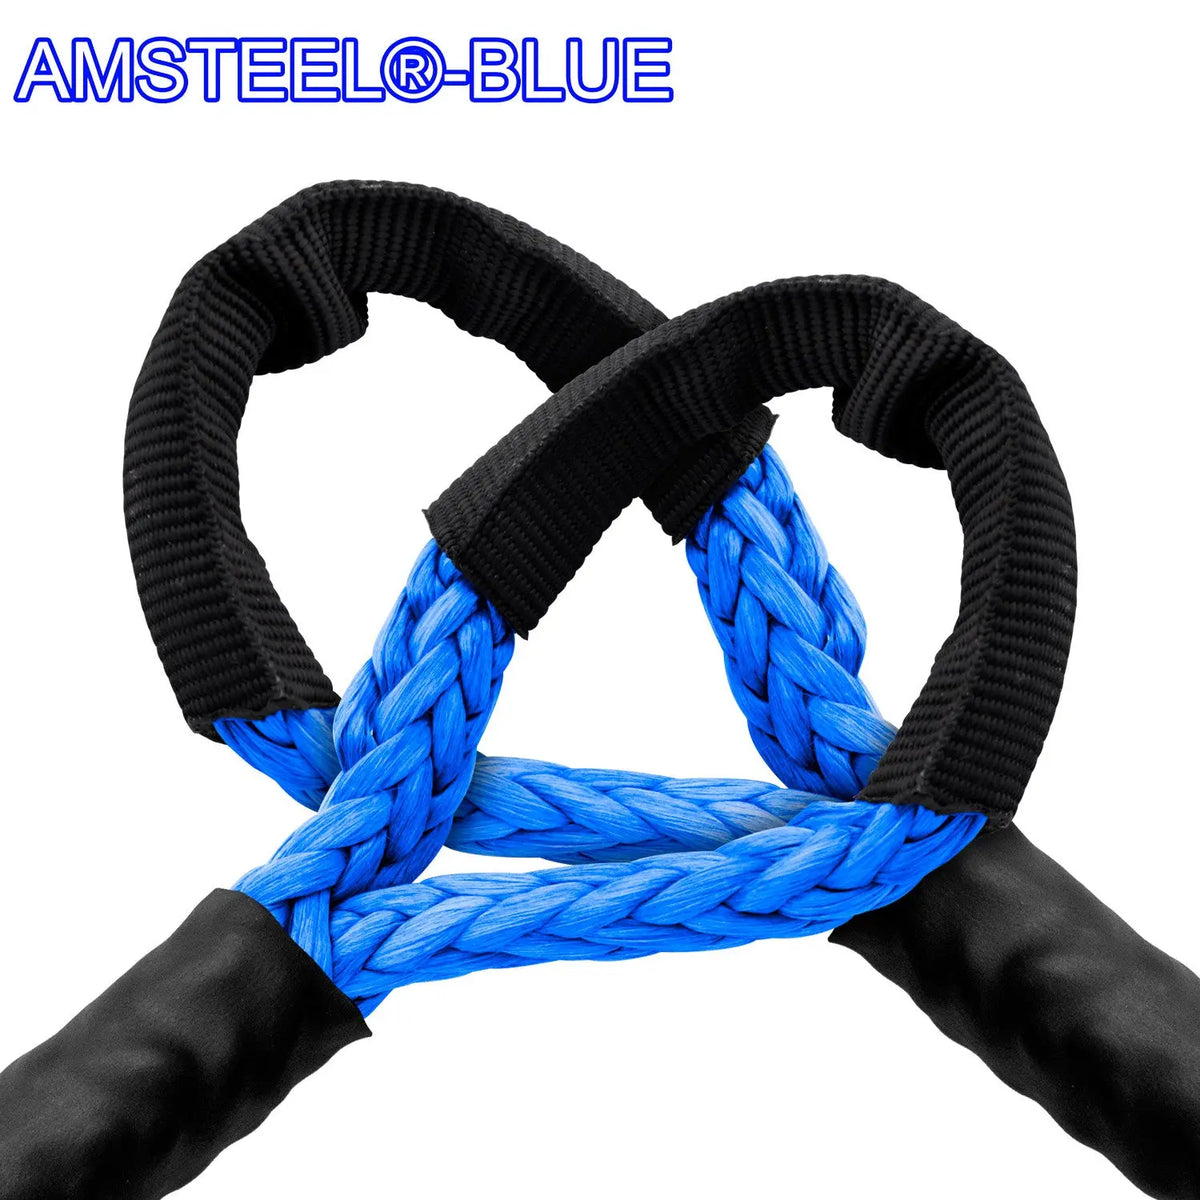 US Made AMSTEEL Blue Winch Rope 3/16 inch x 50 ft Black (5,400 lb Strength)  (Off-Road Vehicle Recovery)